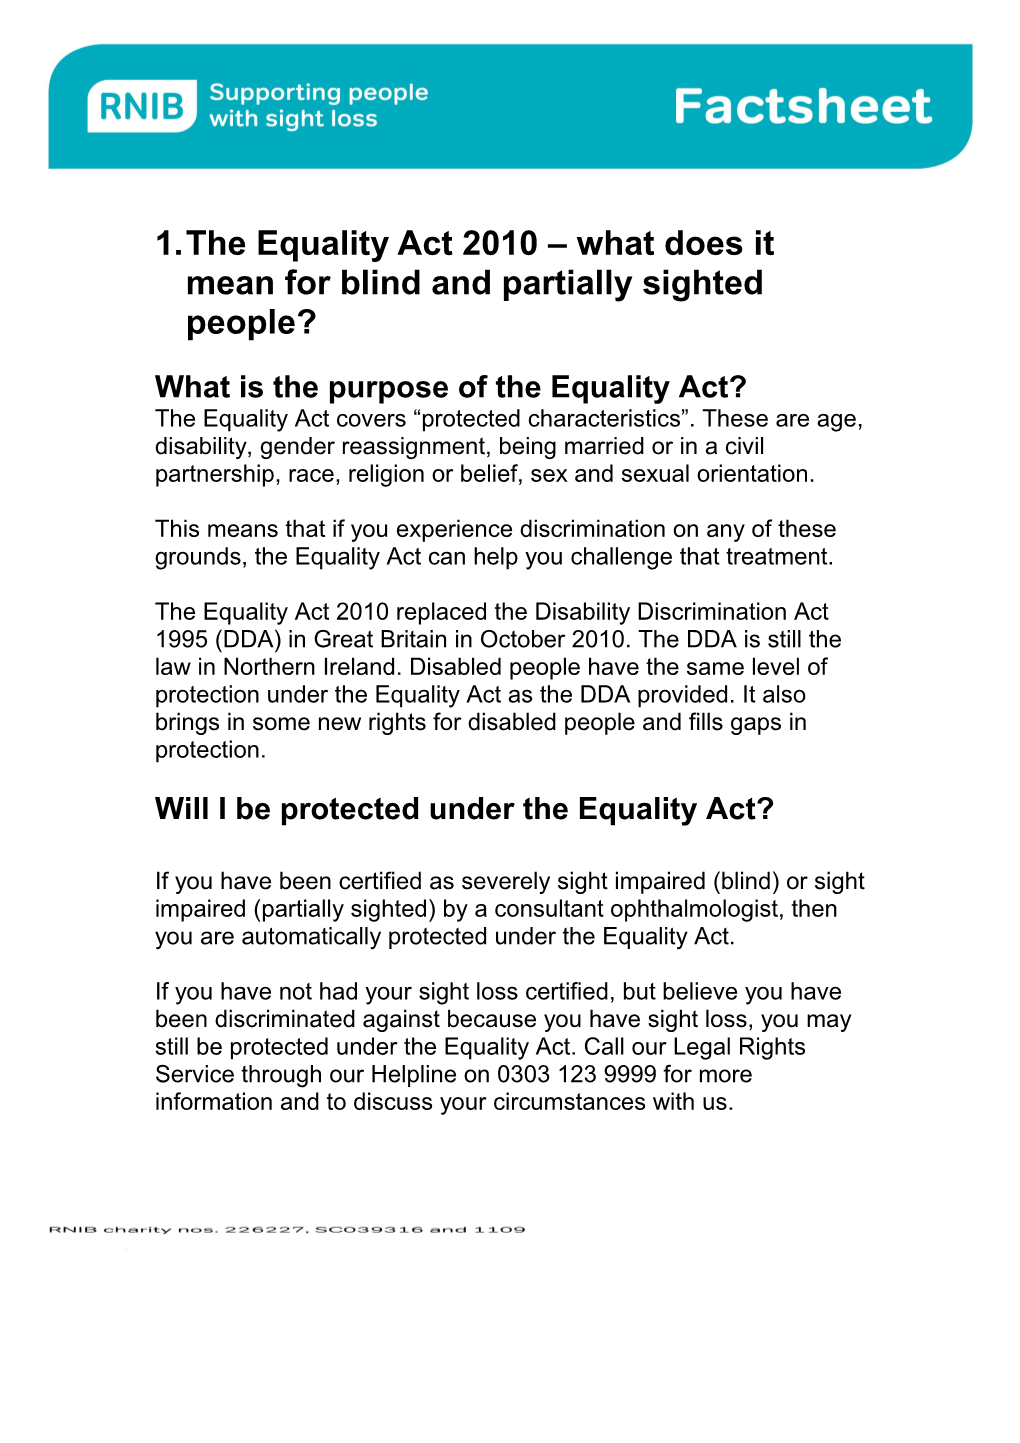 The Equality Act 2010 What Does It Mean for Blind and Partially Sighted People?